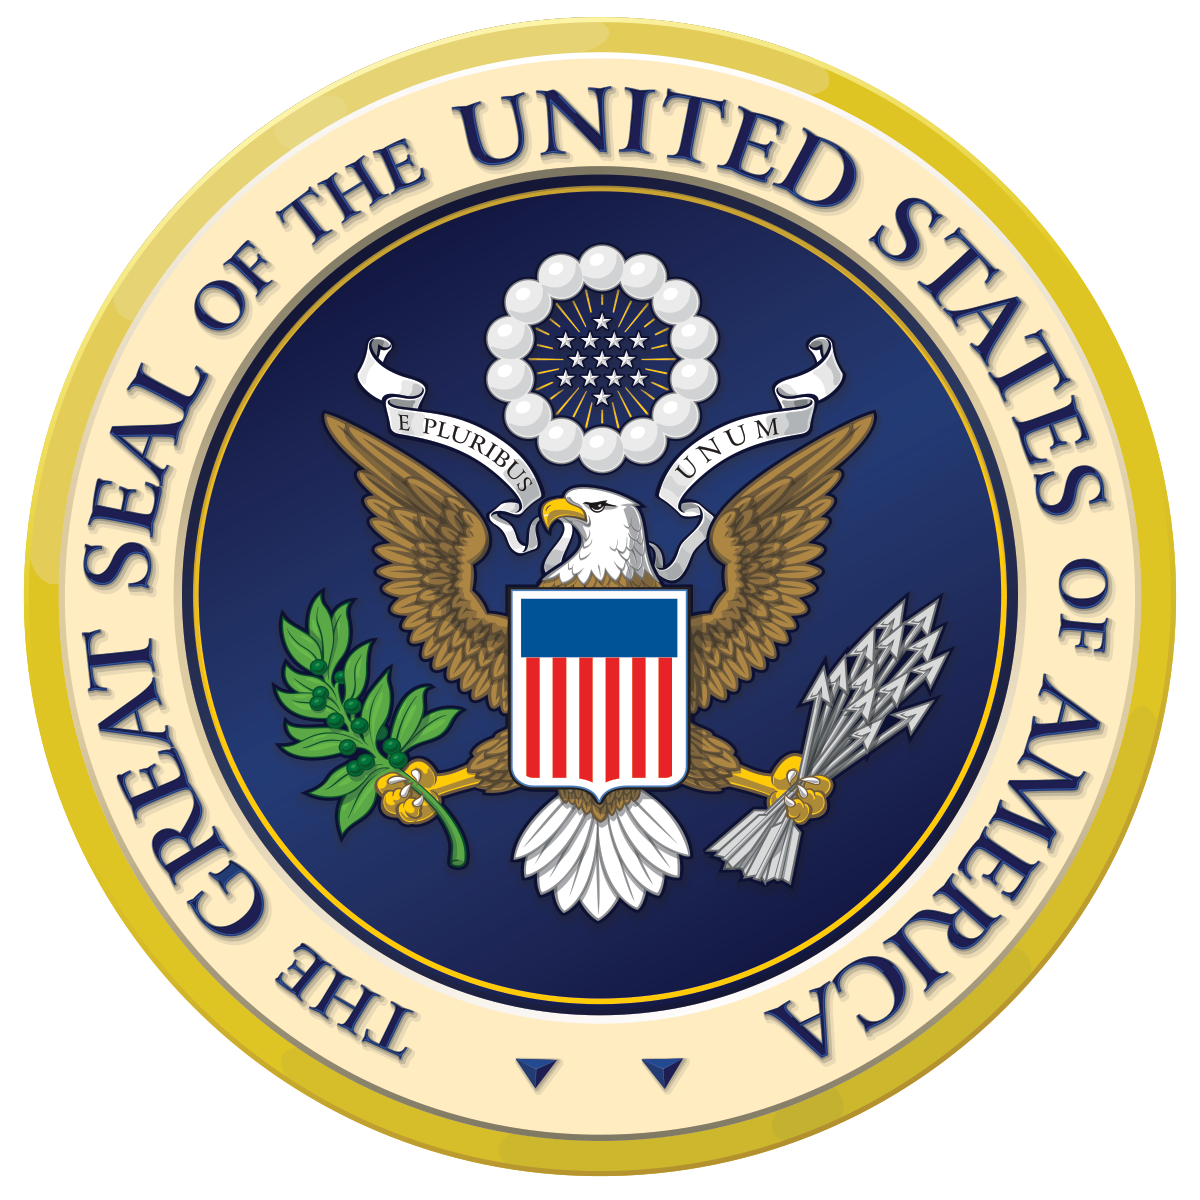 The great seal of the United States of America